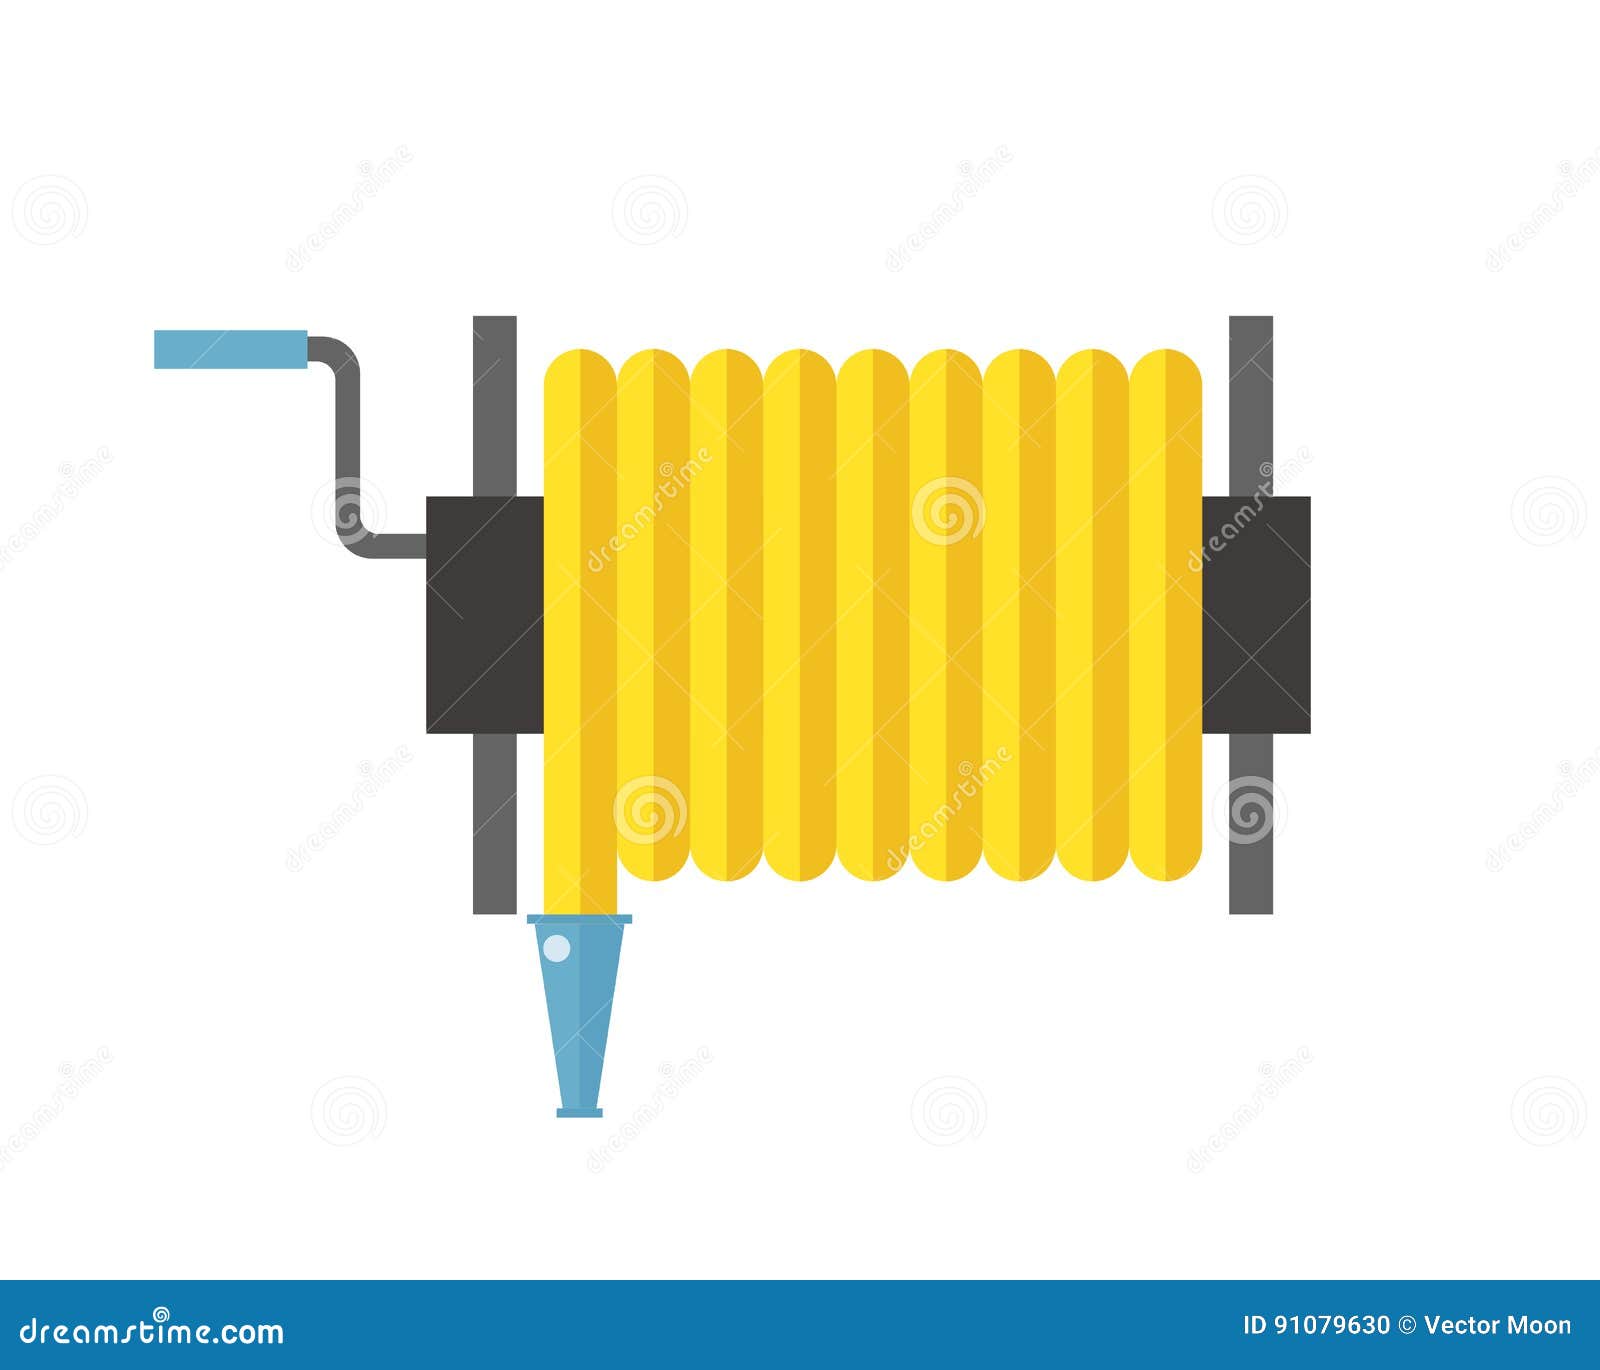 Garden hose reel cleaning service and housework Vector Image